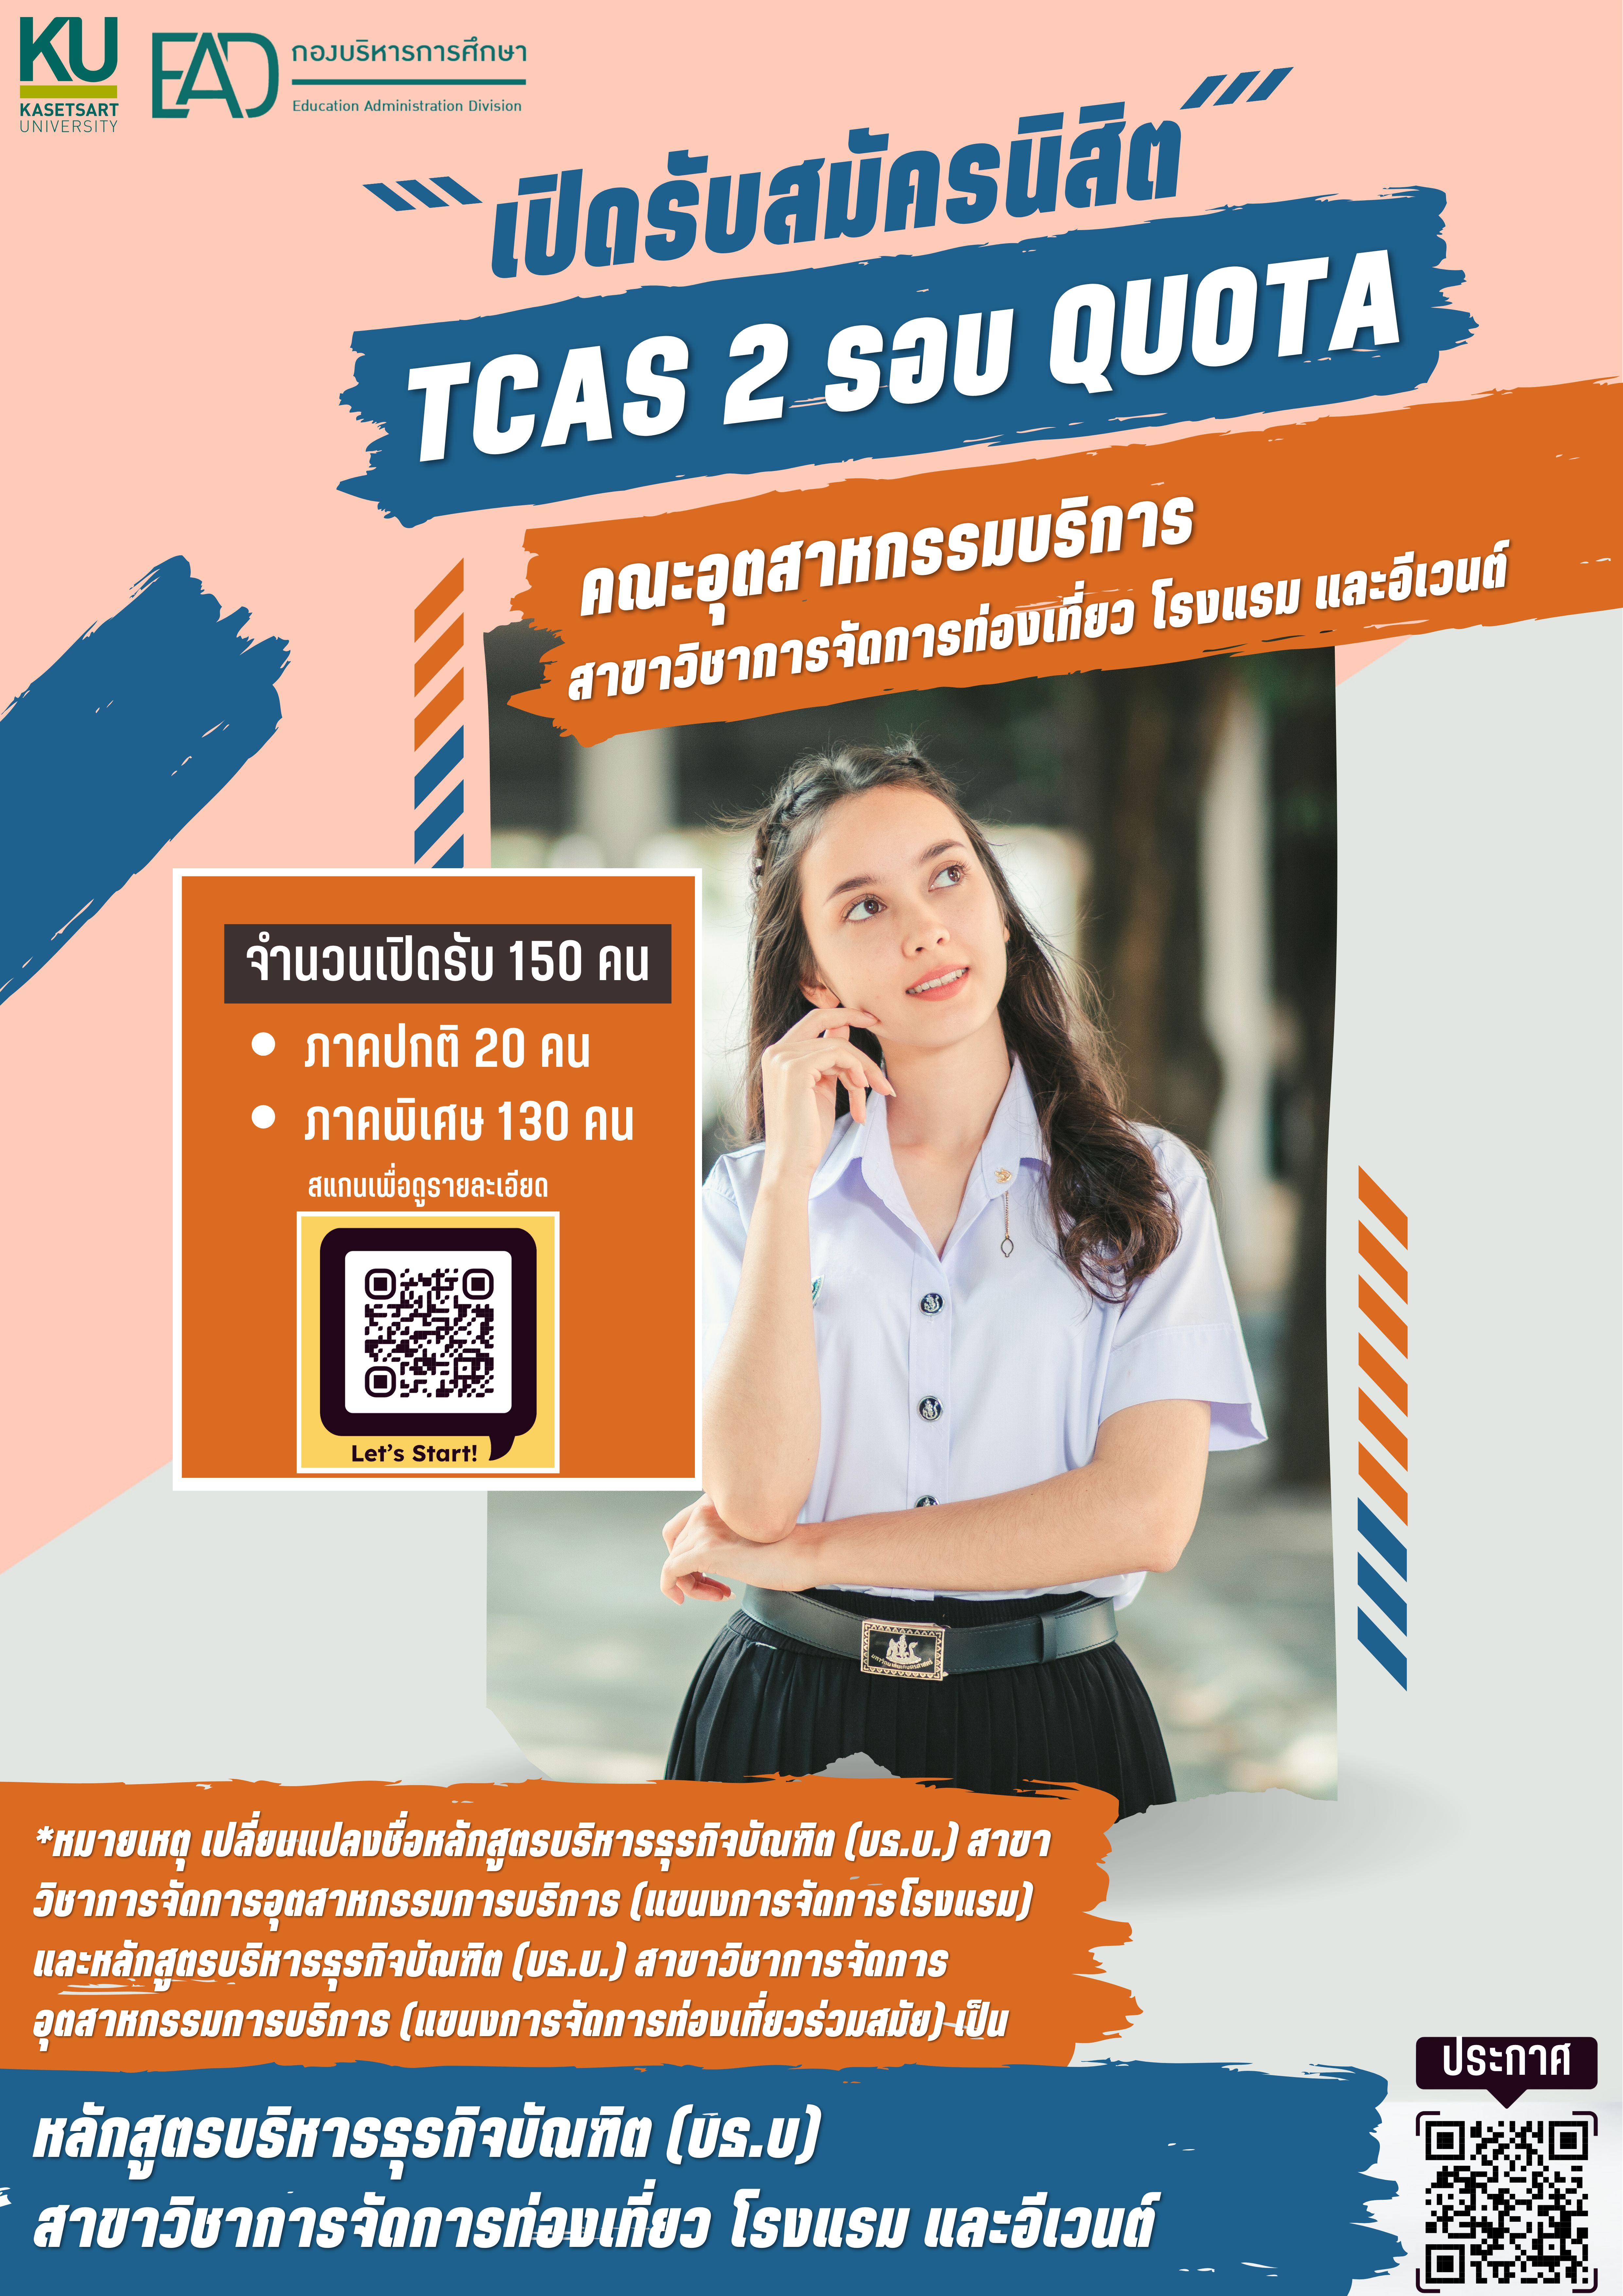 Admission for ku Tcas QUATA 2 Faculty of Hospitality Industry 150367